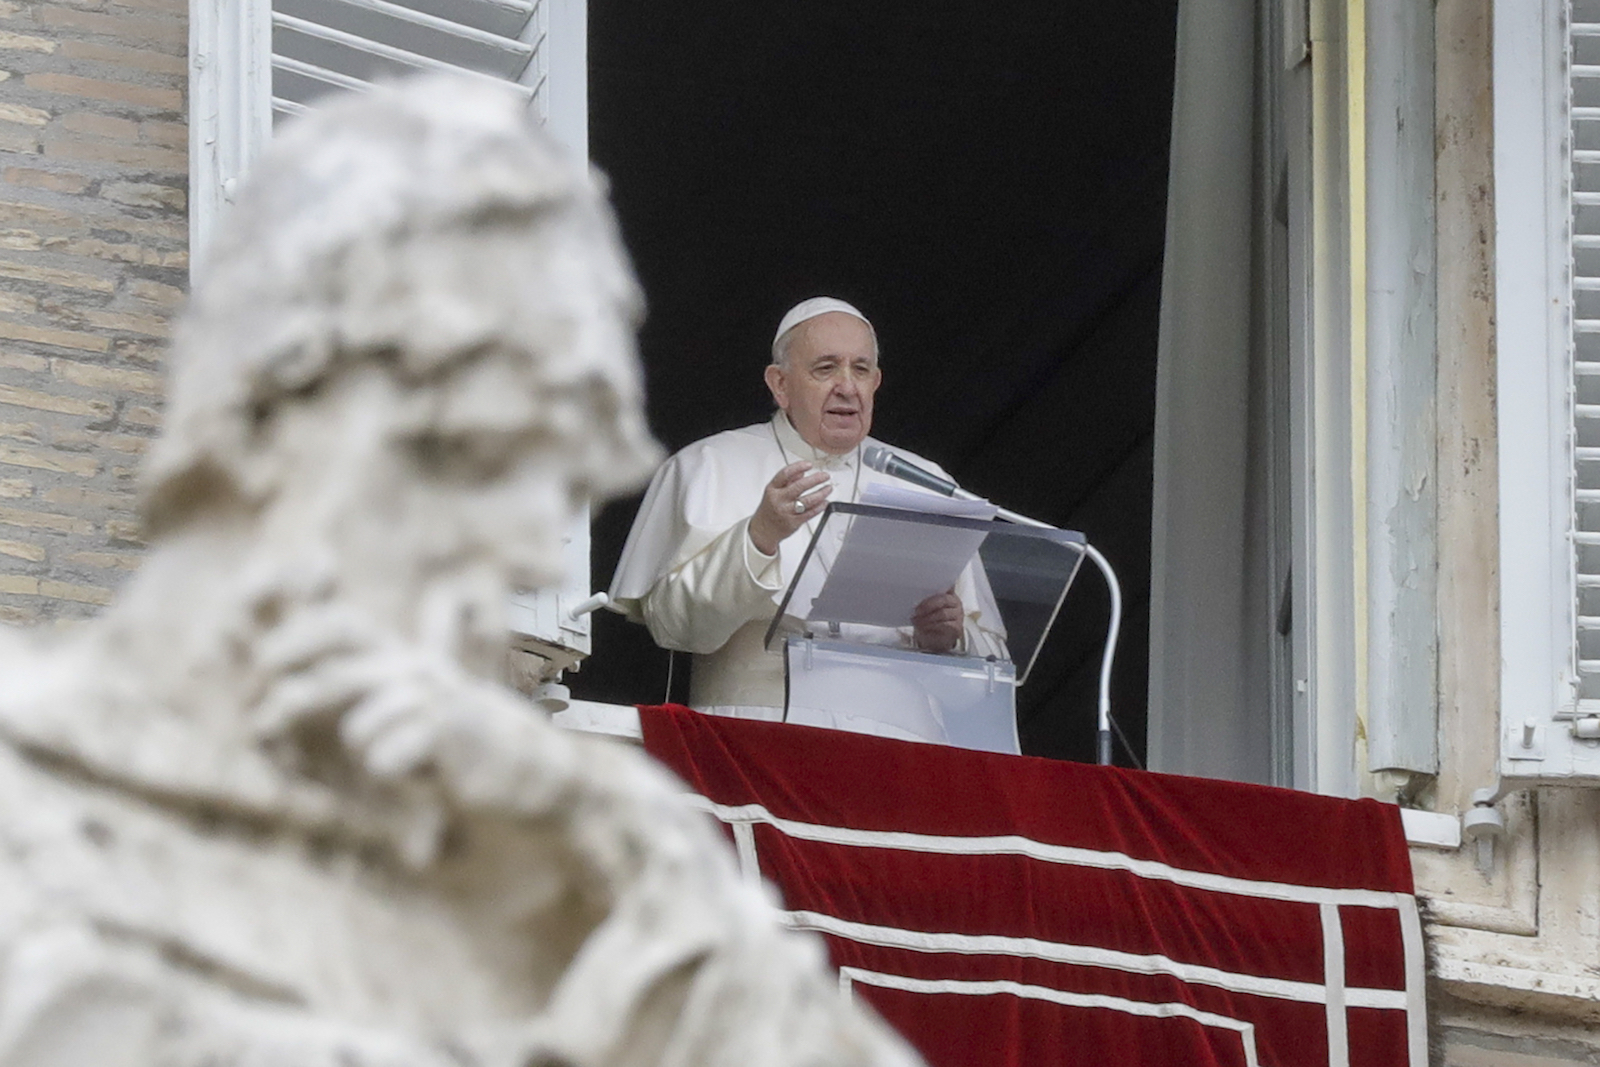 Pope Francis delivers his blessing as he recites the Angelus noon prayer from the window of his studio overlooking St. Peter’s Square, at the Vatican, Tuesday, Dec. 8, 2020. (AP Photo/Andrew Medichini)